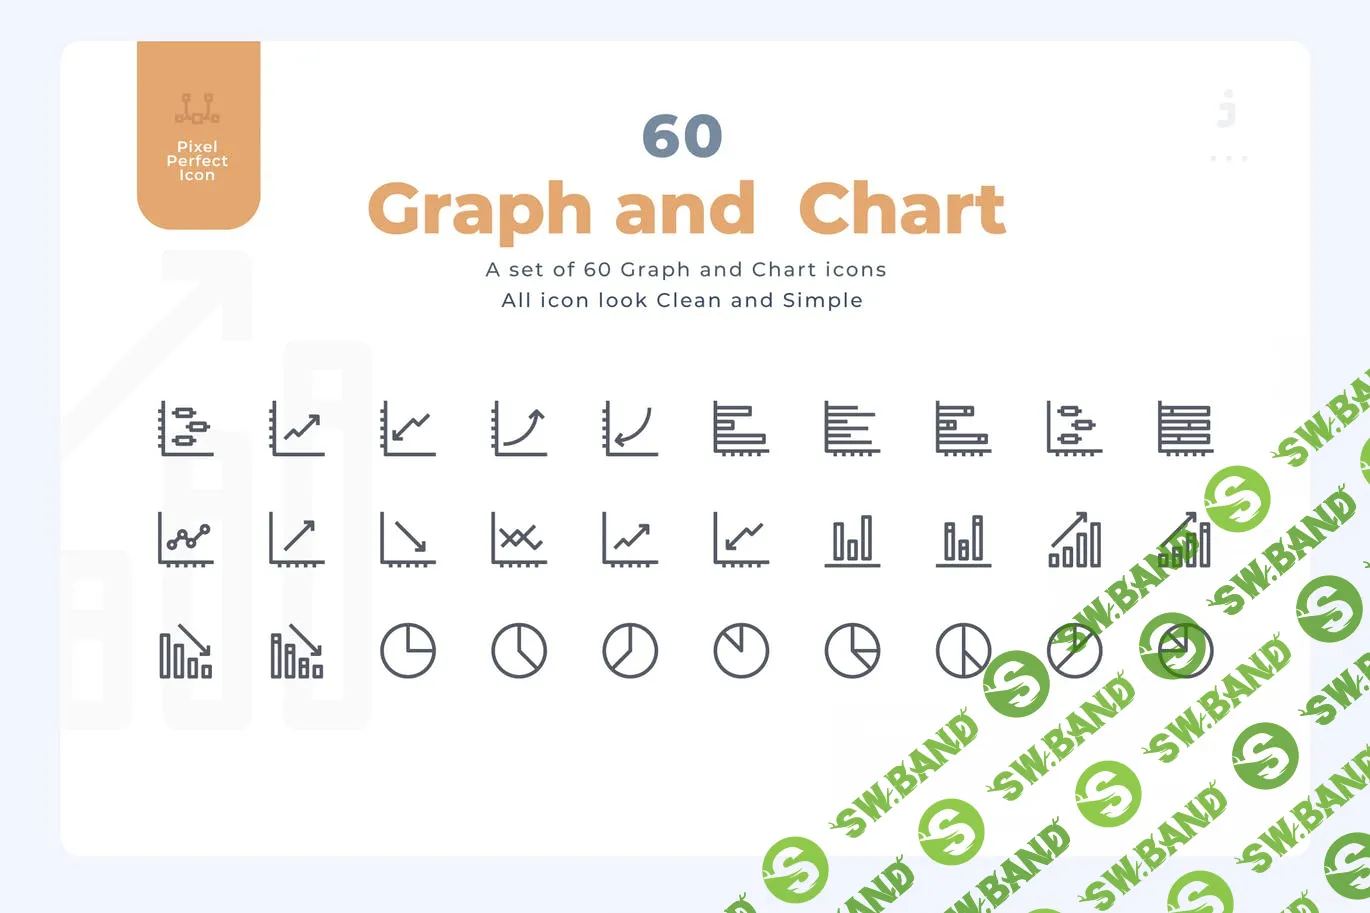 [EnvatoElements] 60 Graph and Chart Icons - Material Icon (2019)